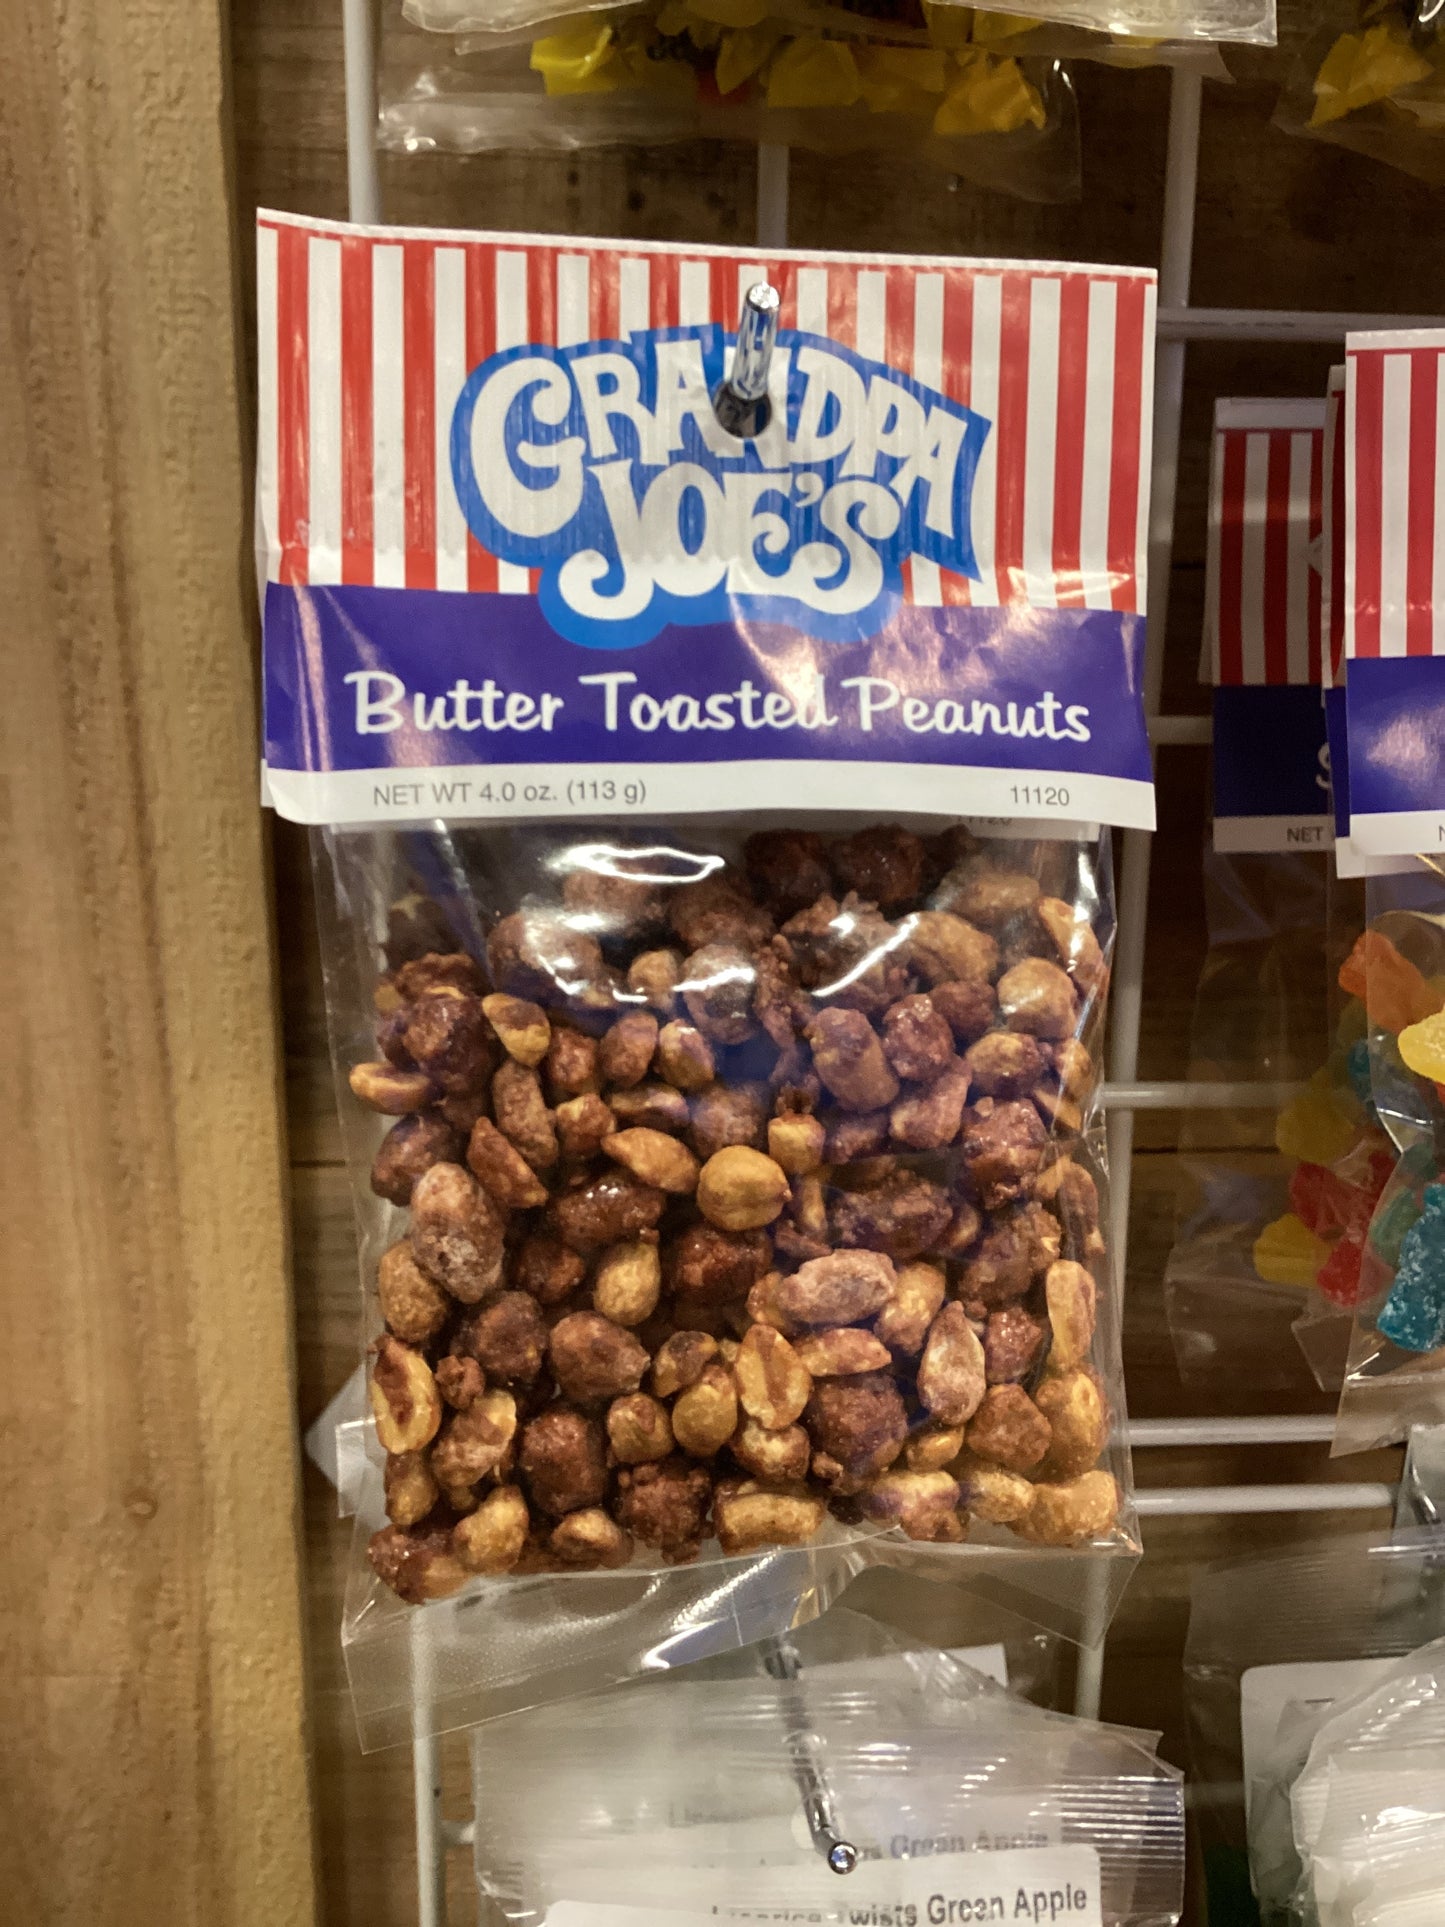 Grandpa Joes Butter Toasted Peanuts